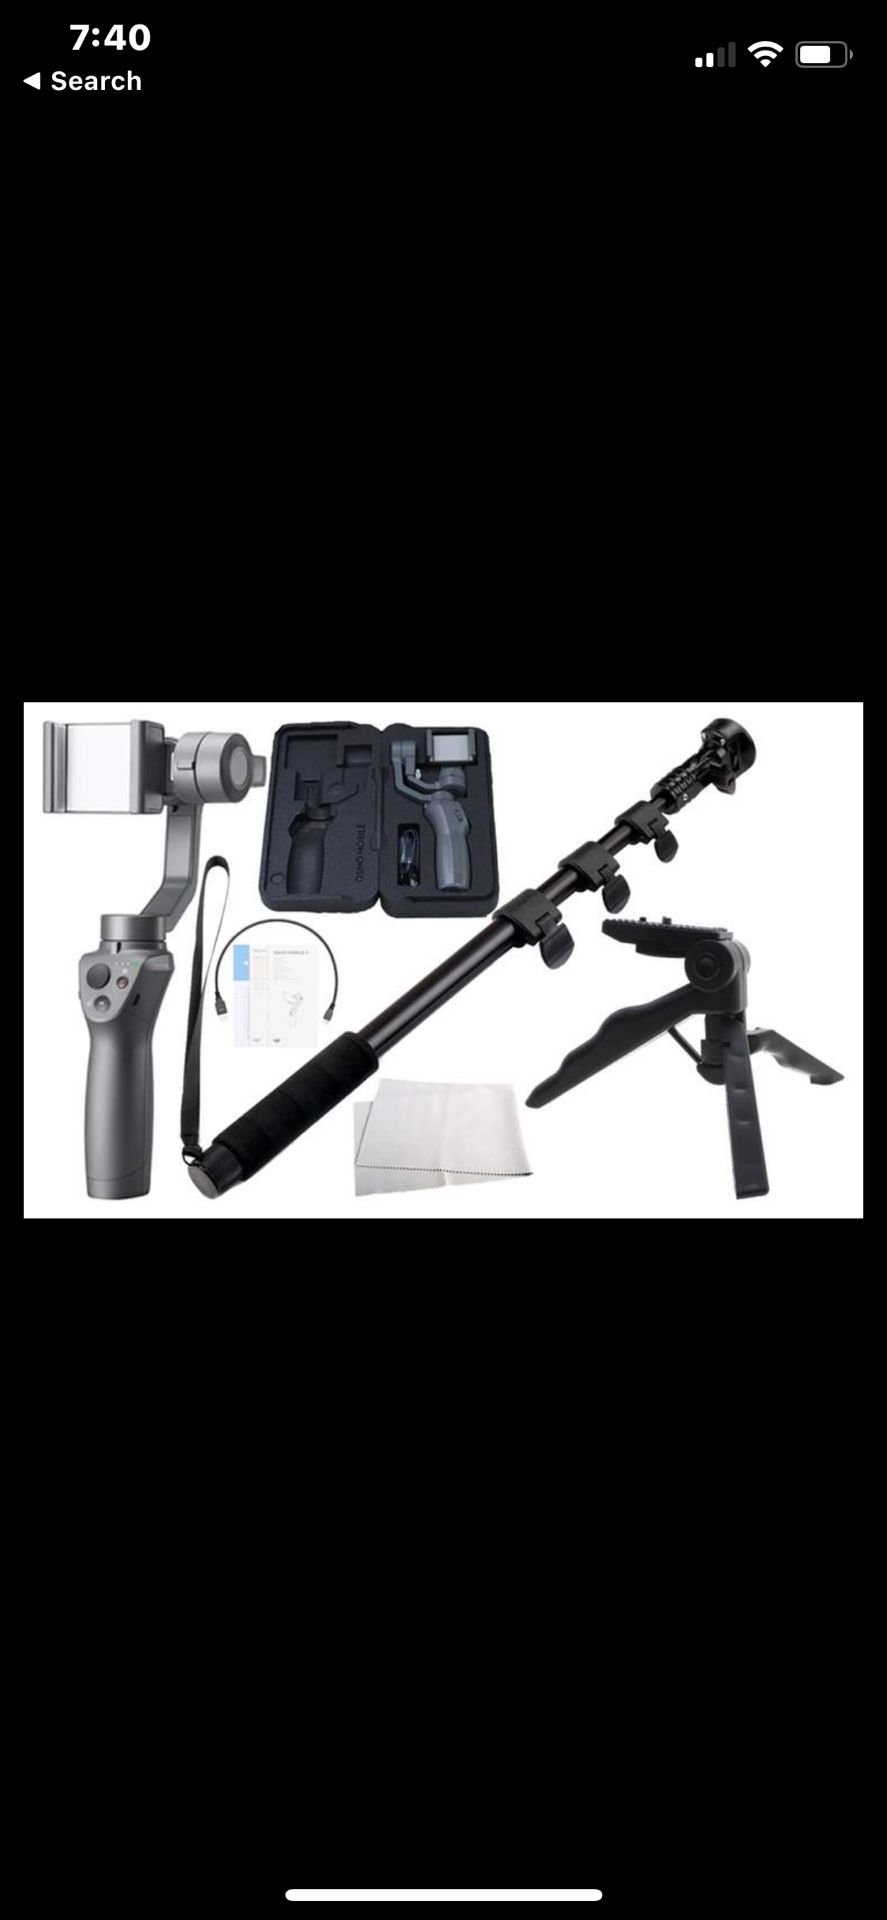 Osmo Mobile 2 Gimbal with accessories!